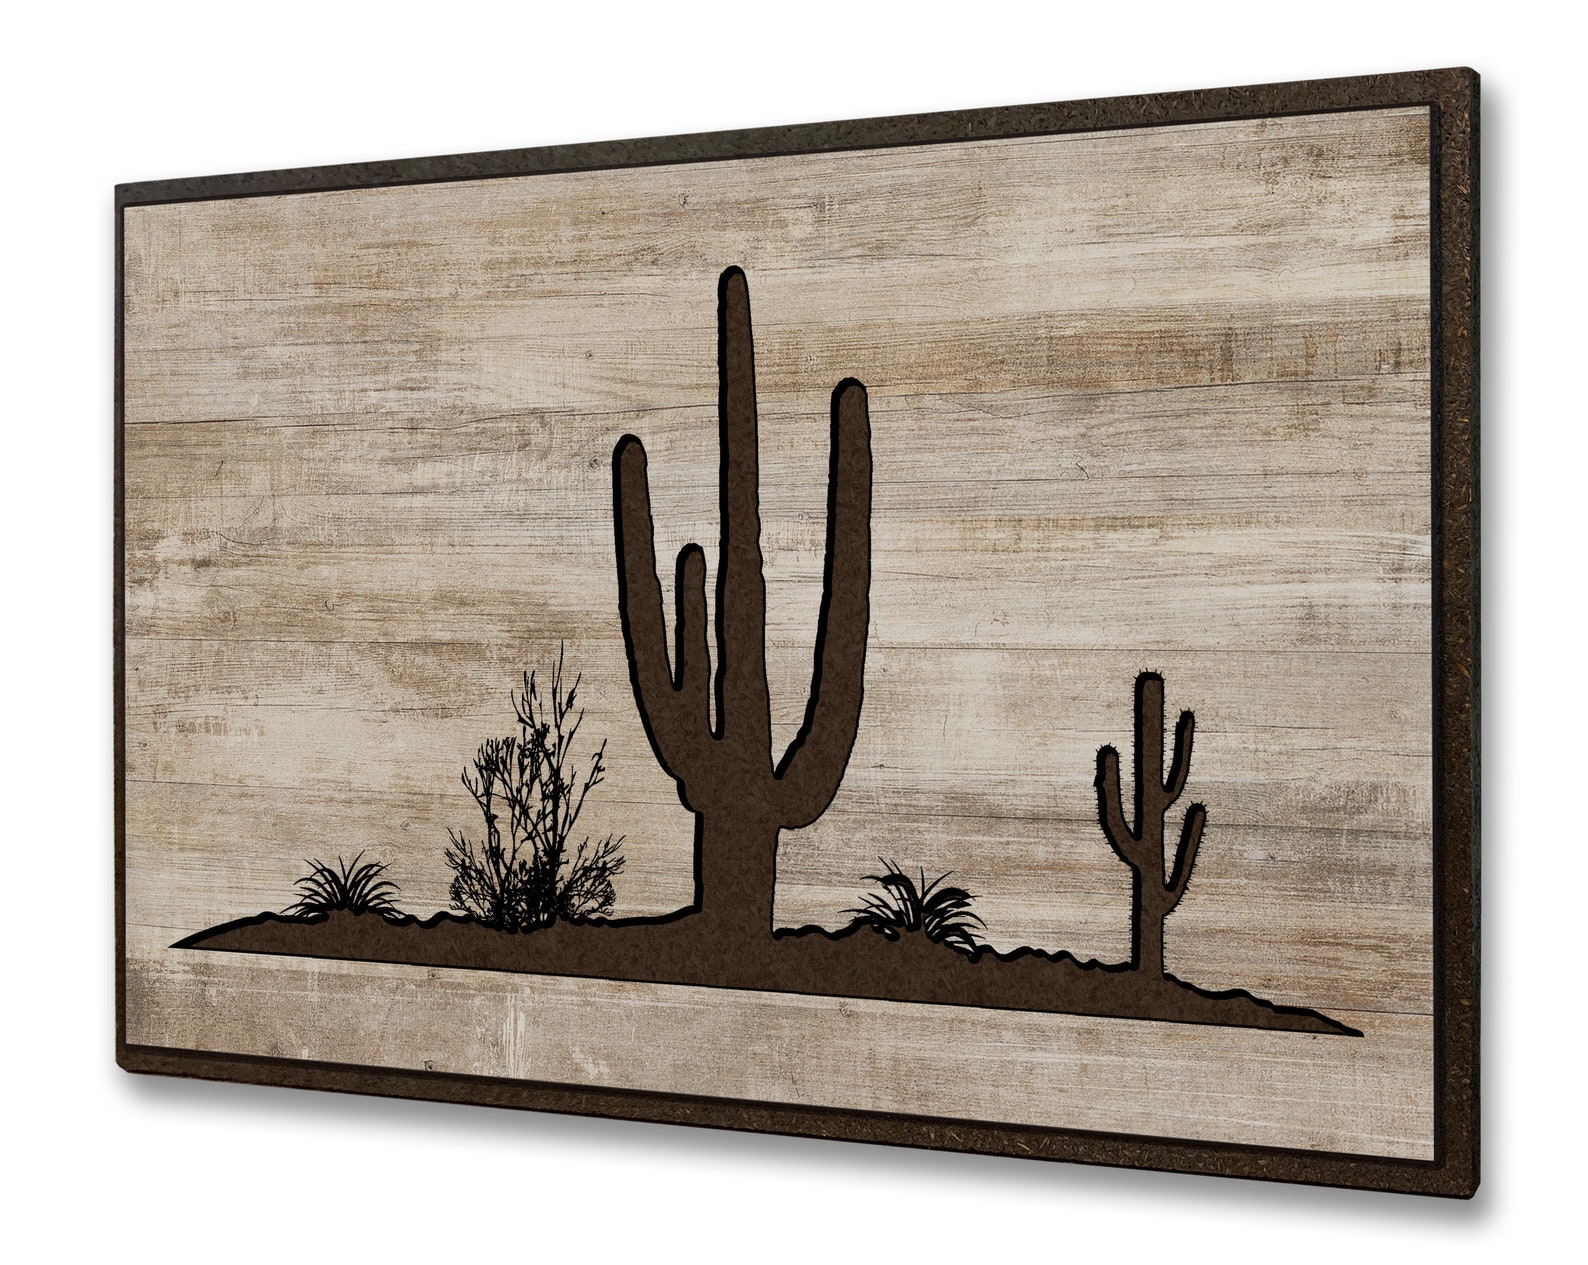 Carved Desert Scene Picture Wood Wall Art Cactus Wall | Etsy